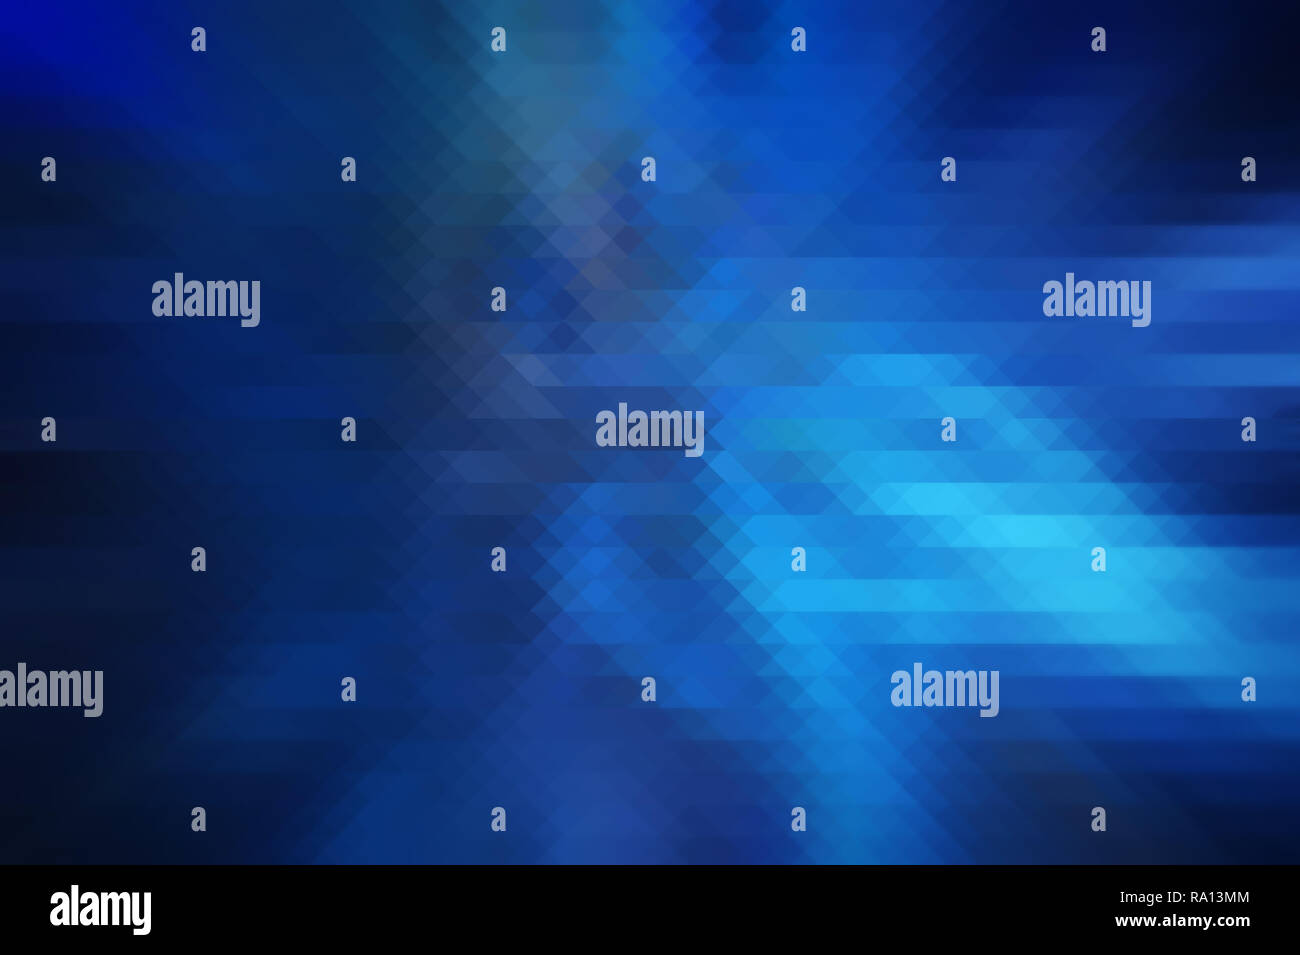 High res backgrounds hi-res stock photography and images - Alamy